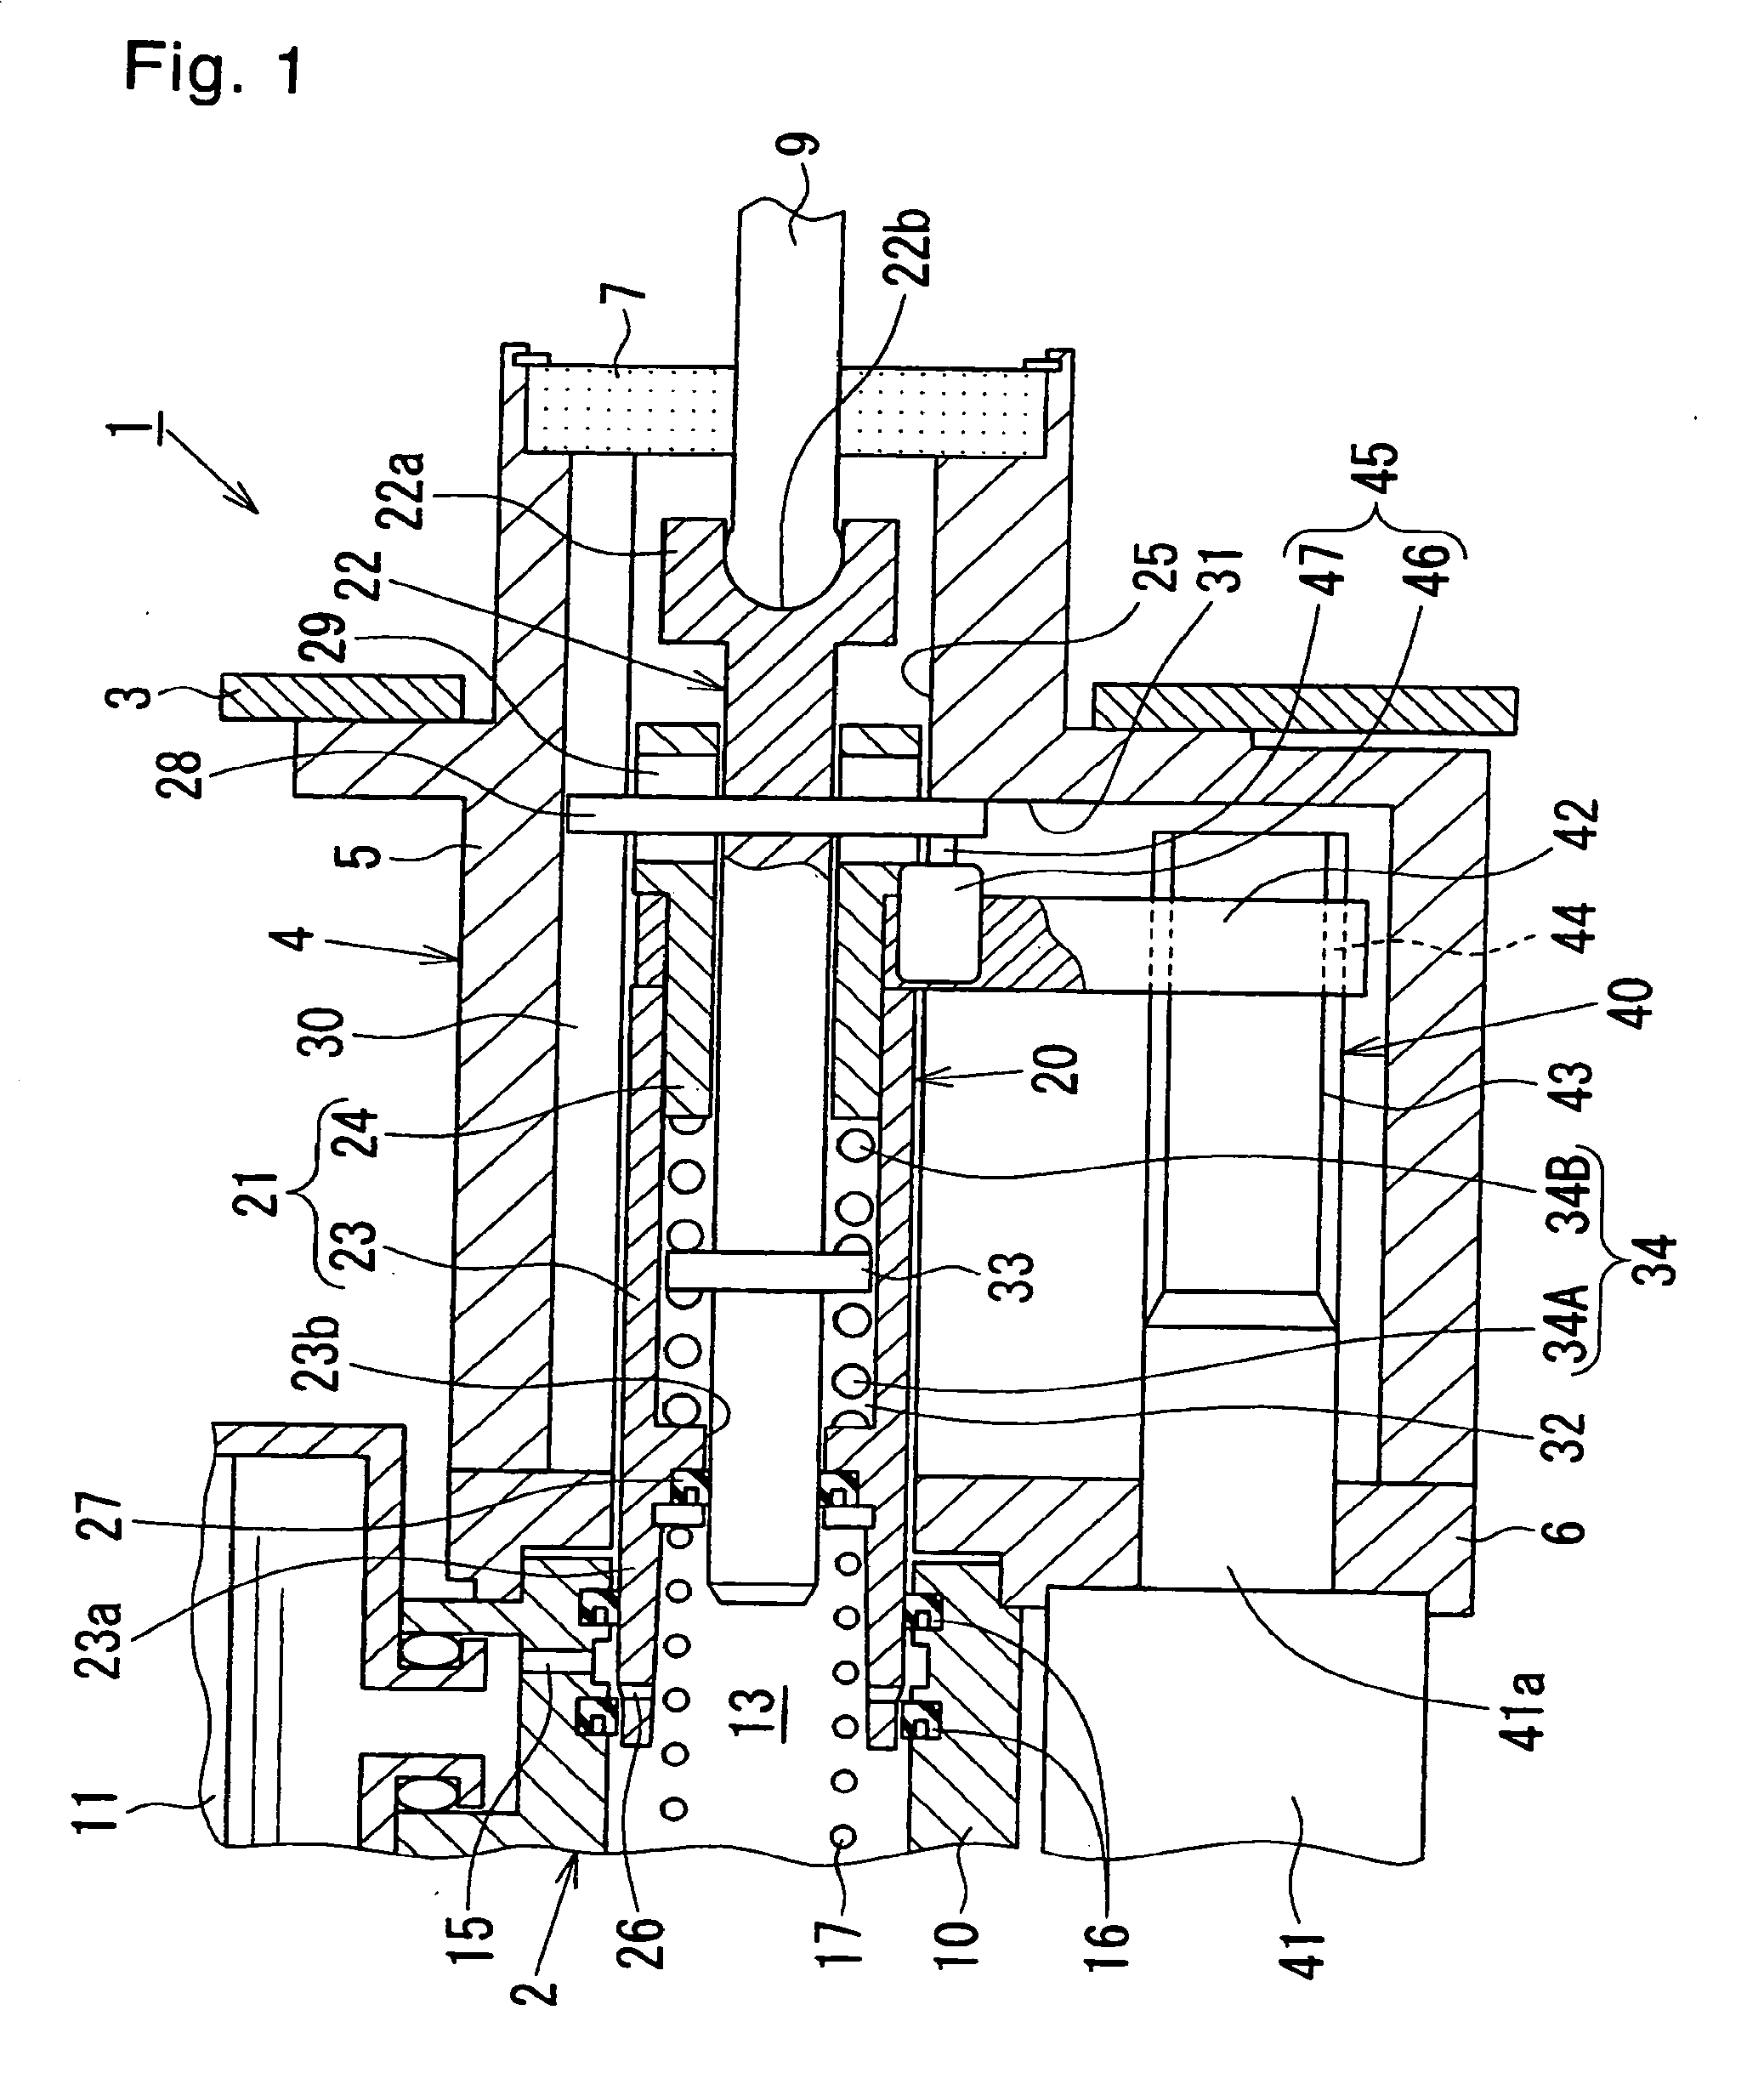 Electrically actuated brake booster